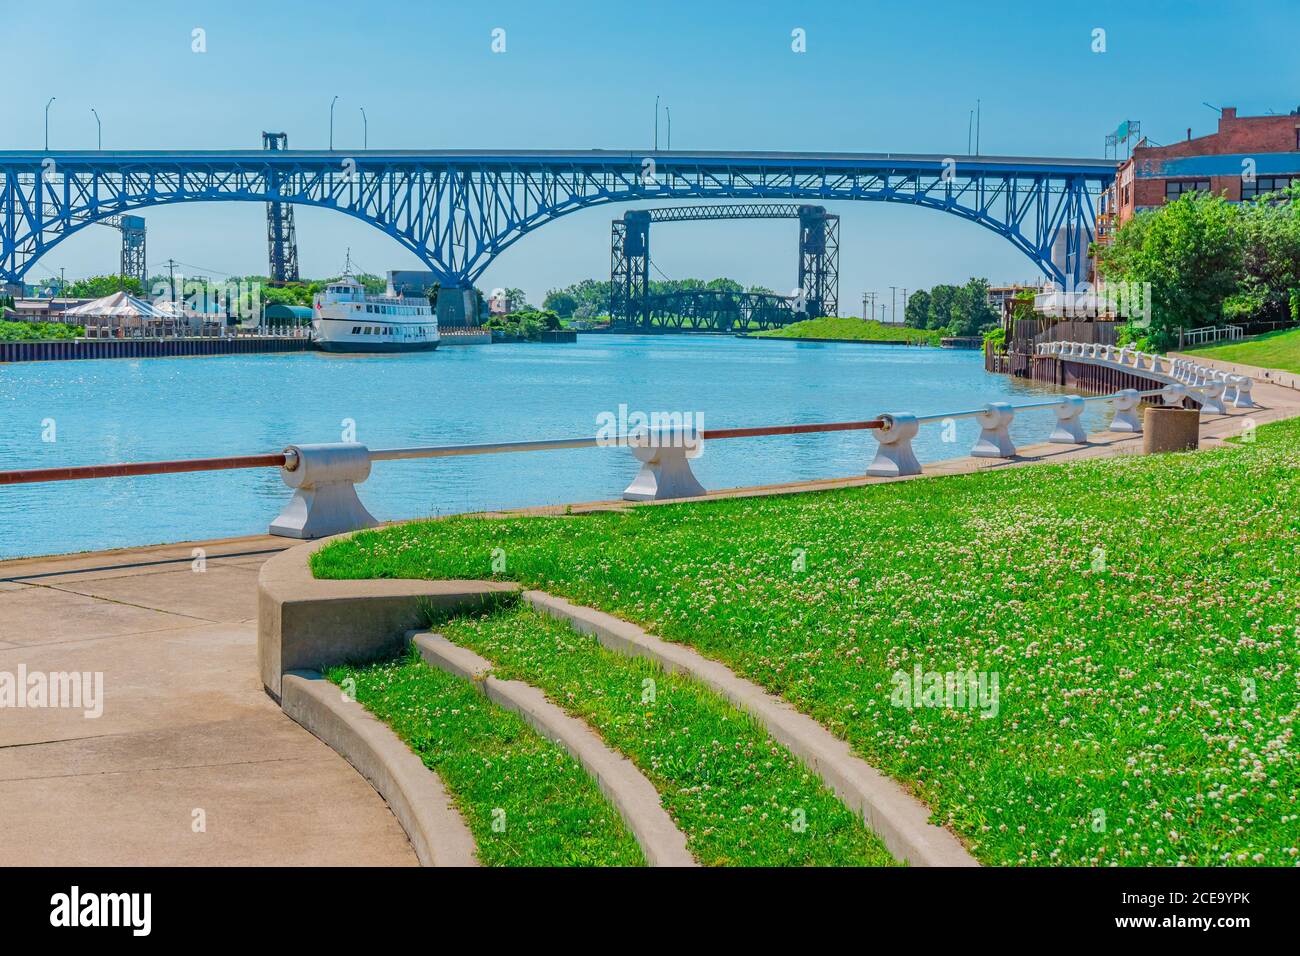 Cuyahoga River runs under a bridge and through the town of Cleveland, Ohio. Older structures line the river, as well as contemporary. Stock Photo